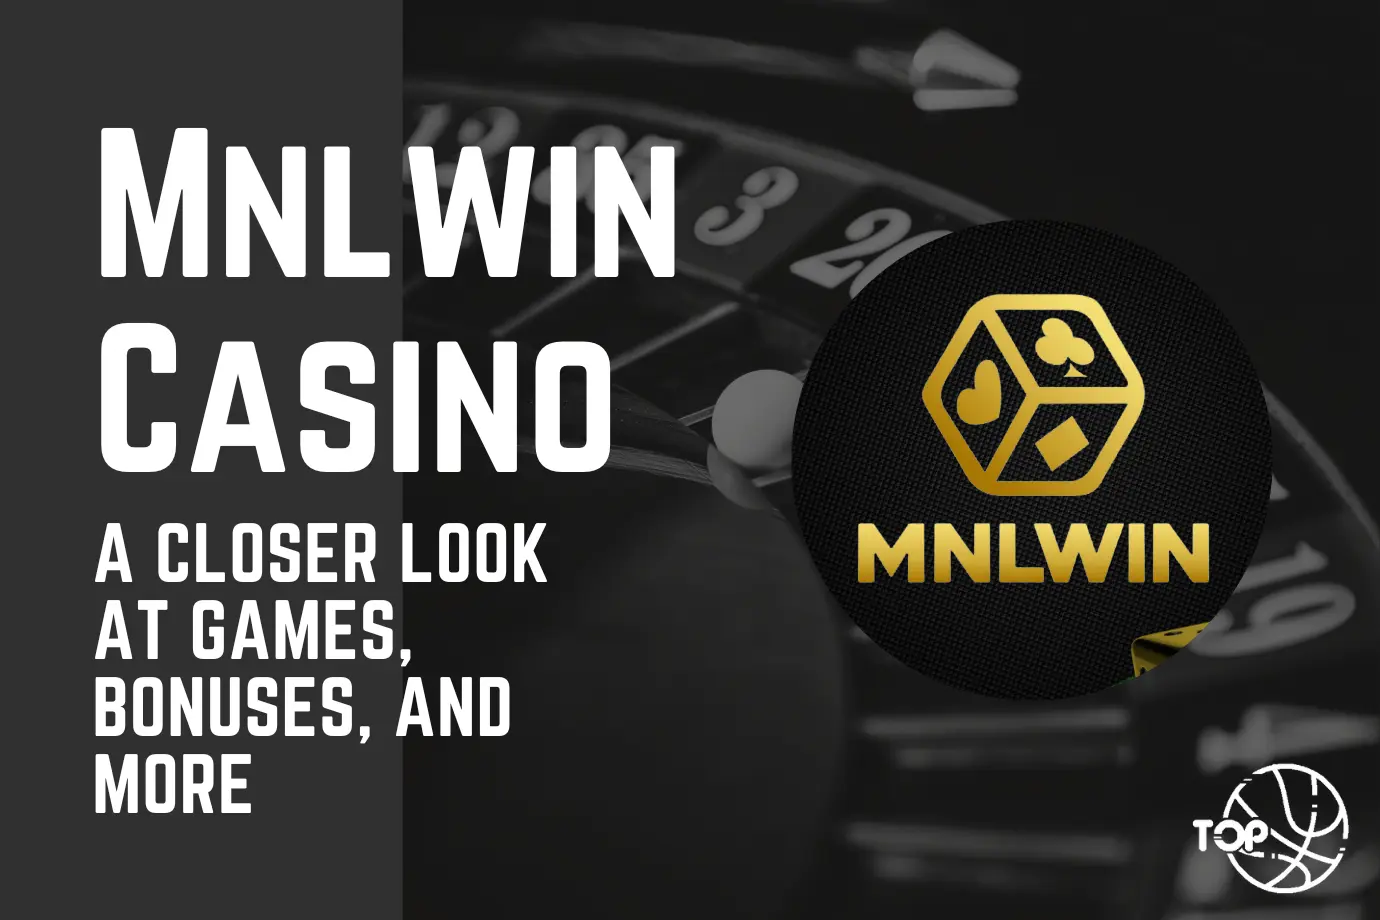 Mnlwin Casino: A Closer Look at Games, Bonuses, and More